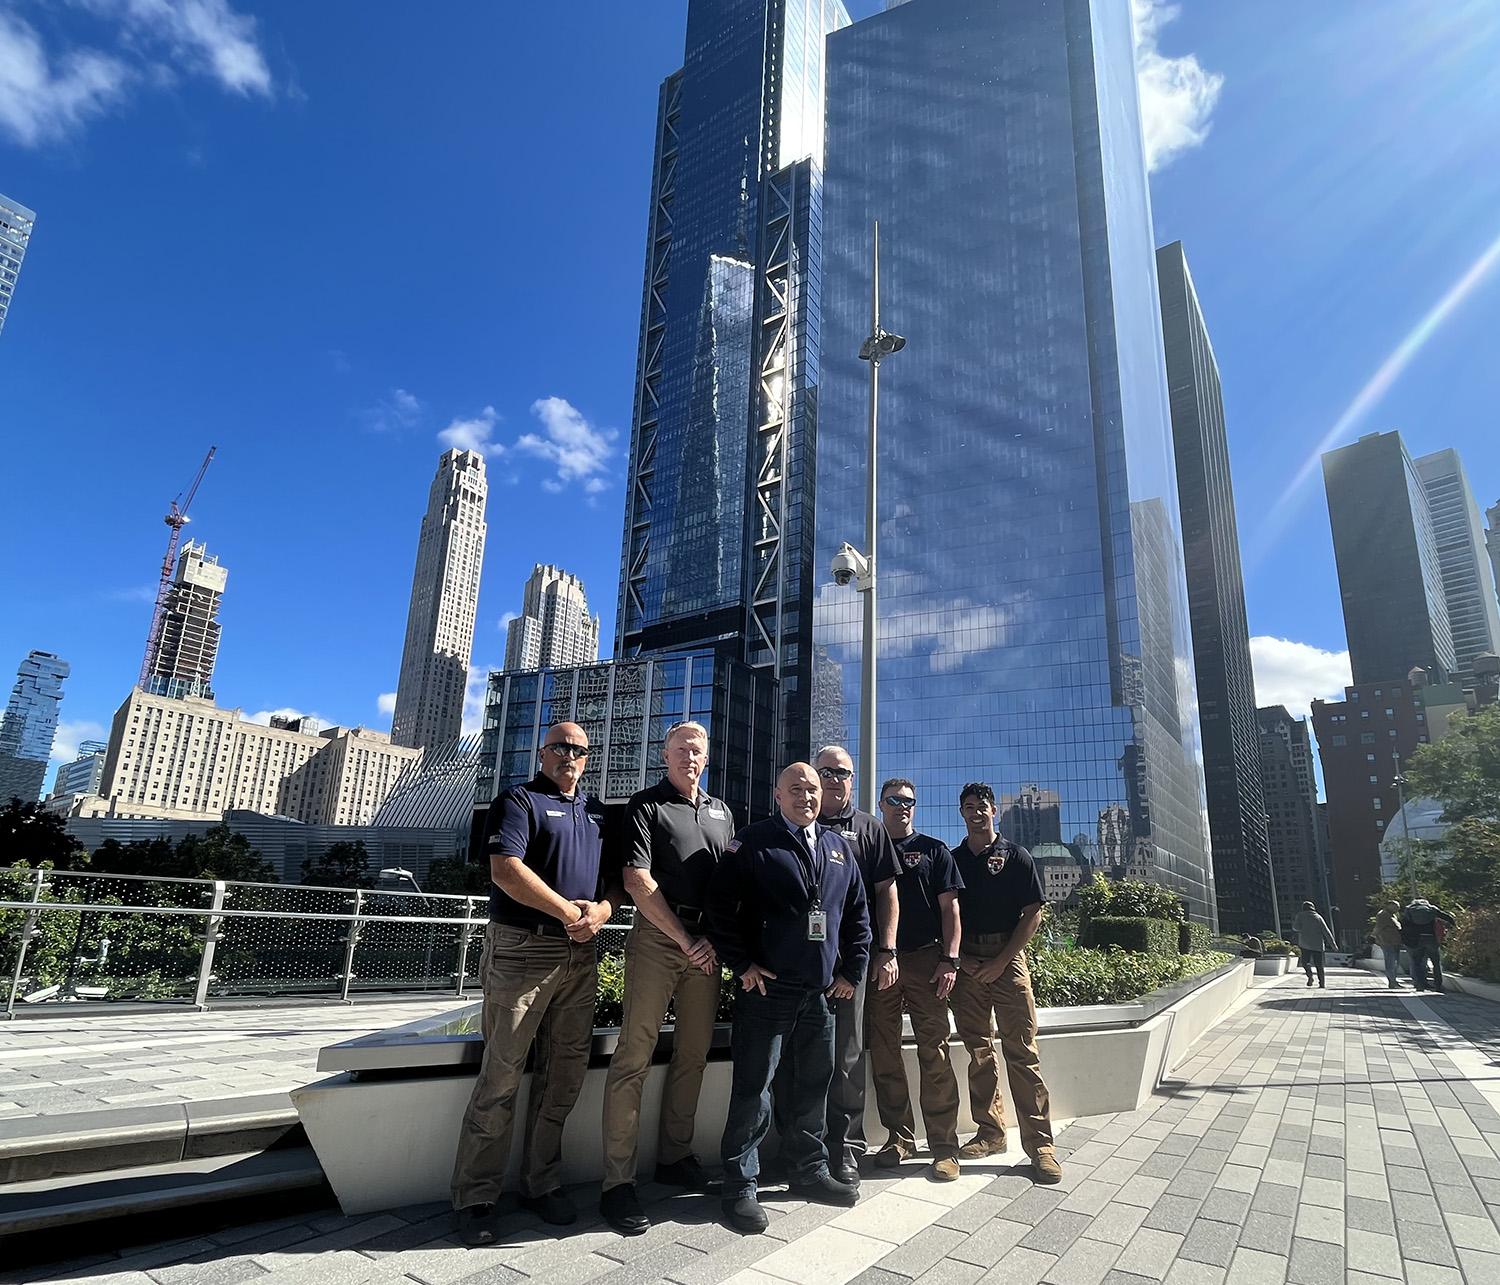 Group of men in front of One World Trade Center and the National September 11 Memorial & Museum